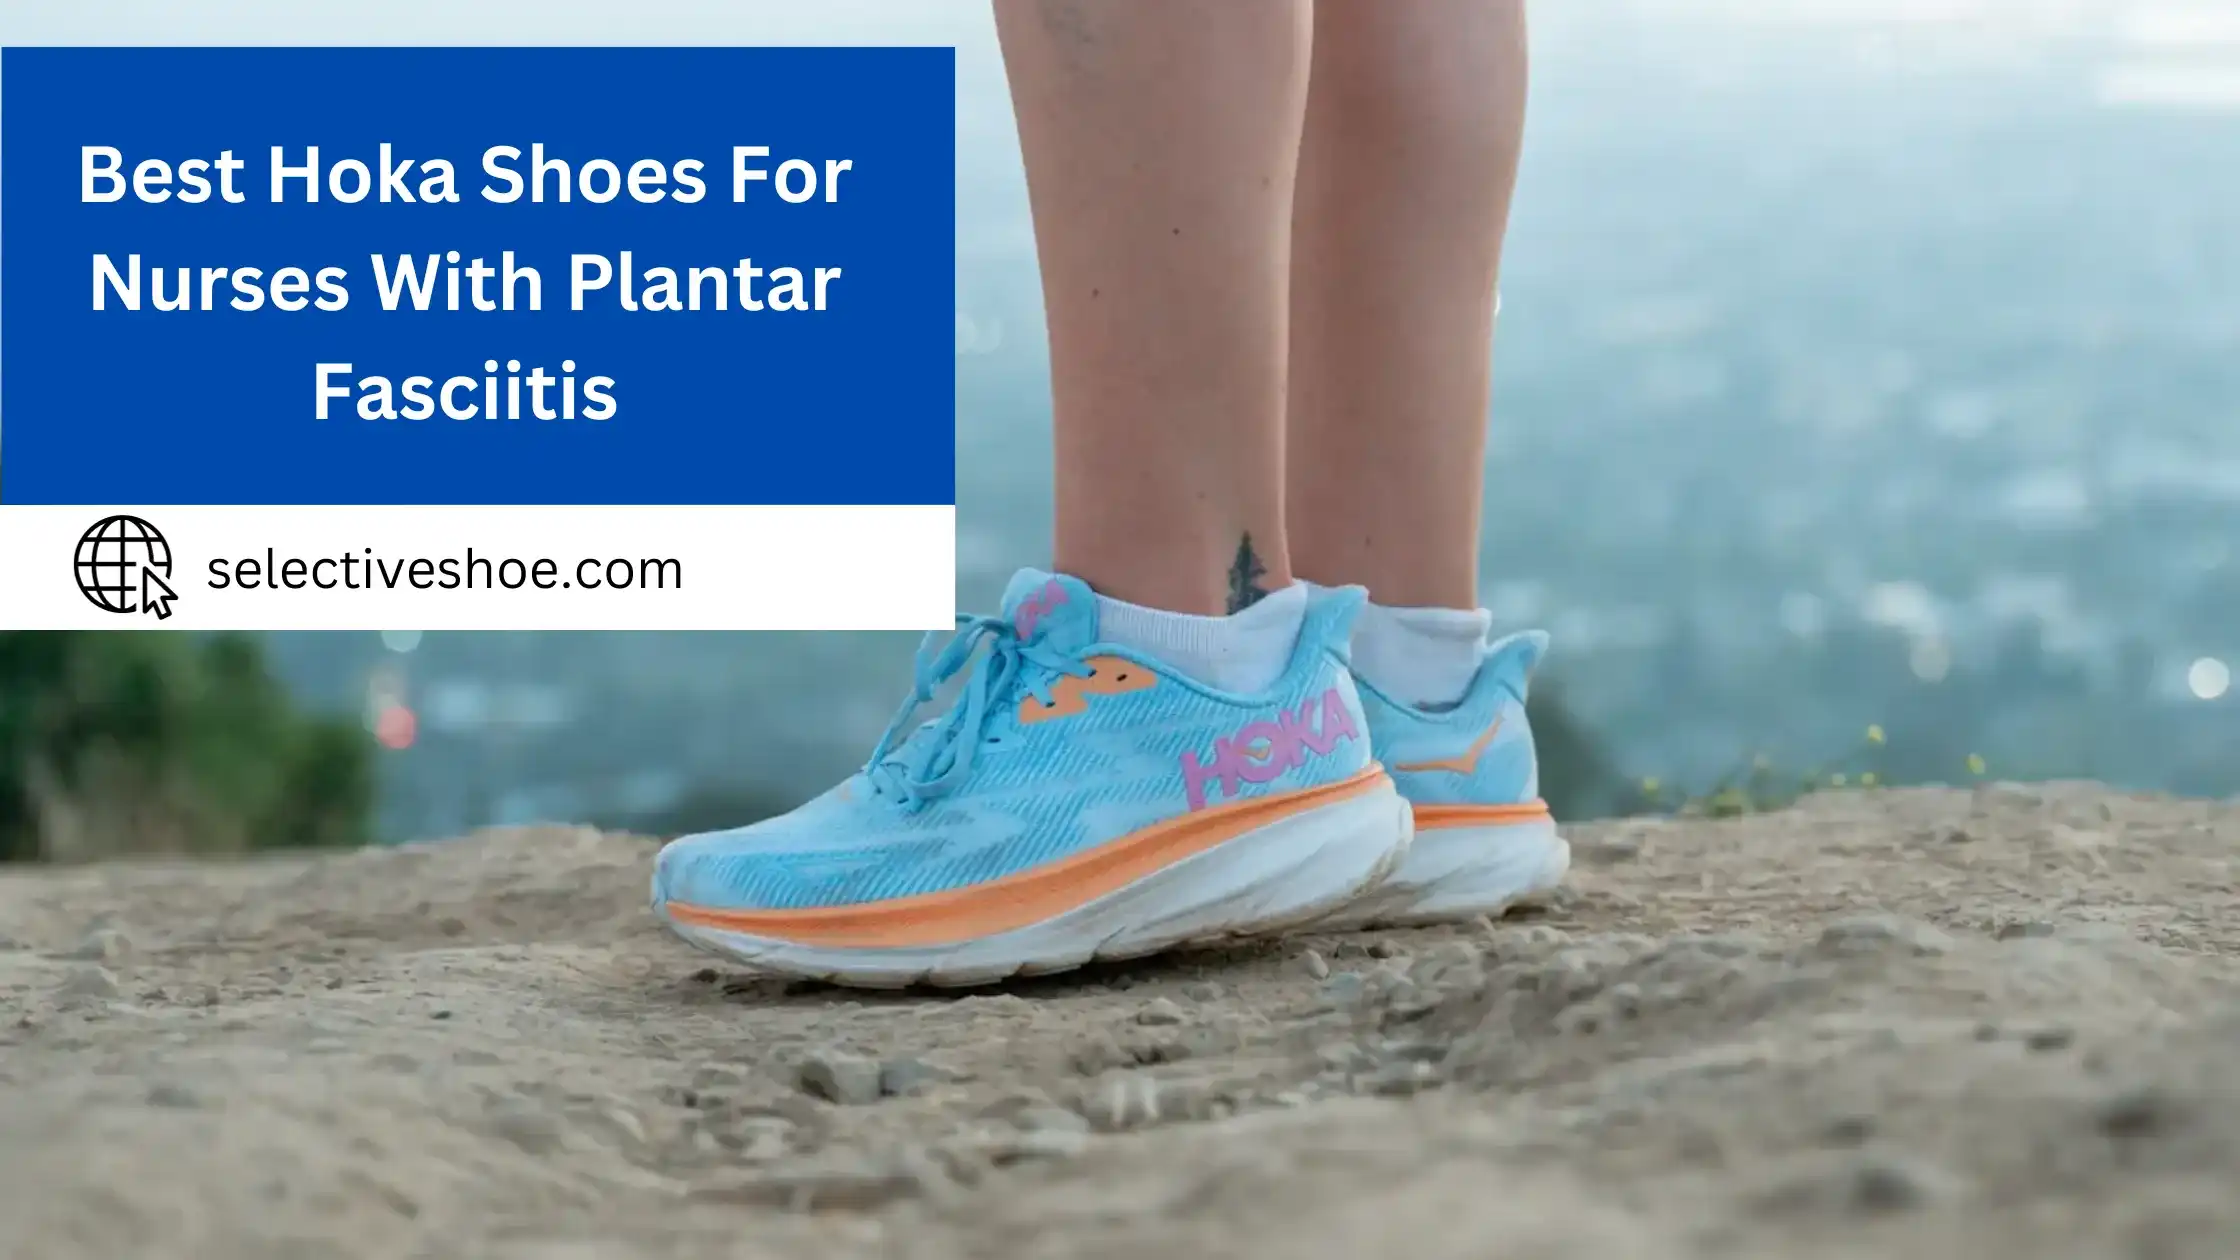 Best Hoka Shoes For Nurses With Plantar Fasciitis - Latest Guide